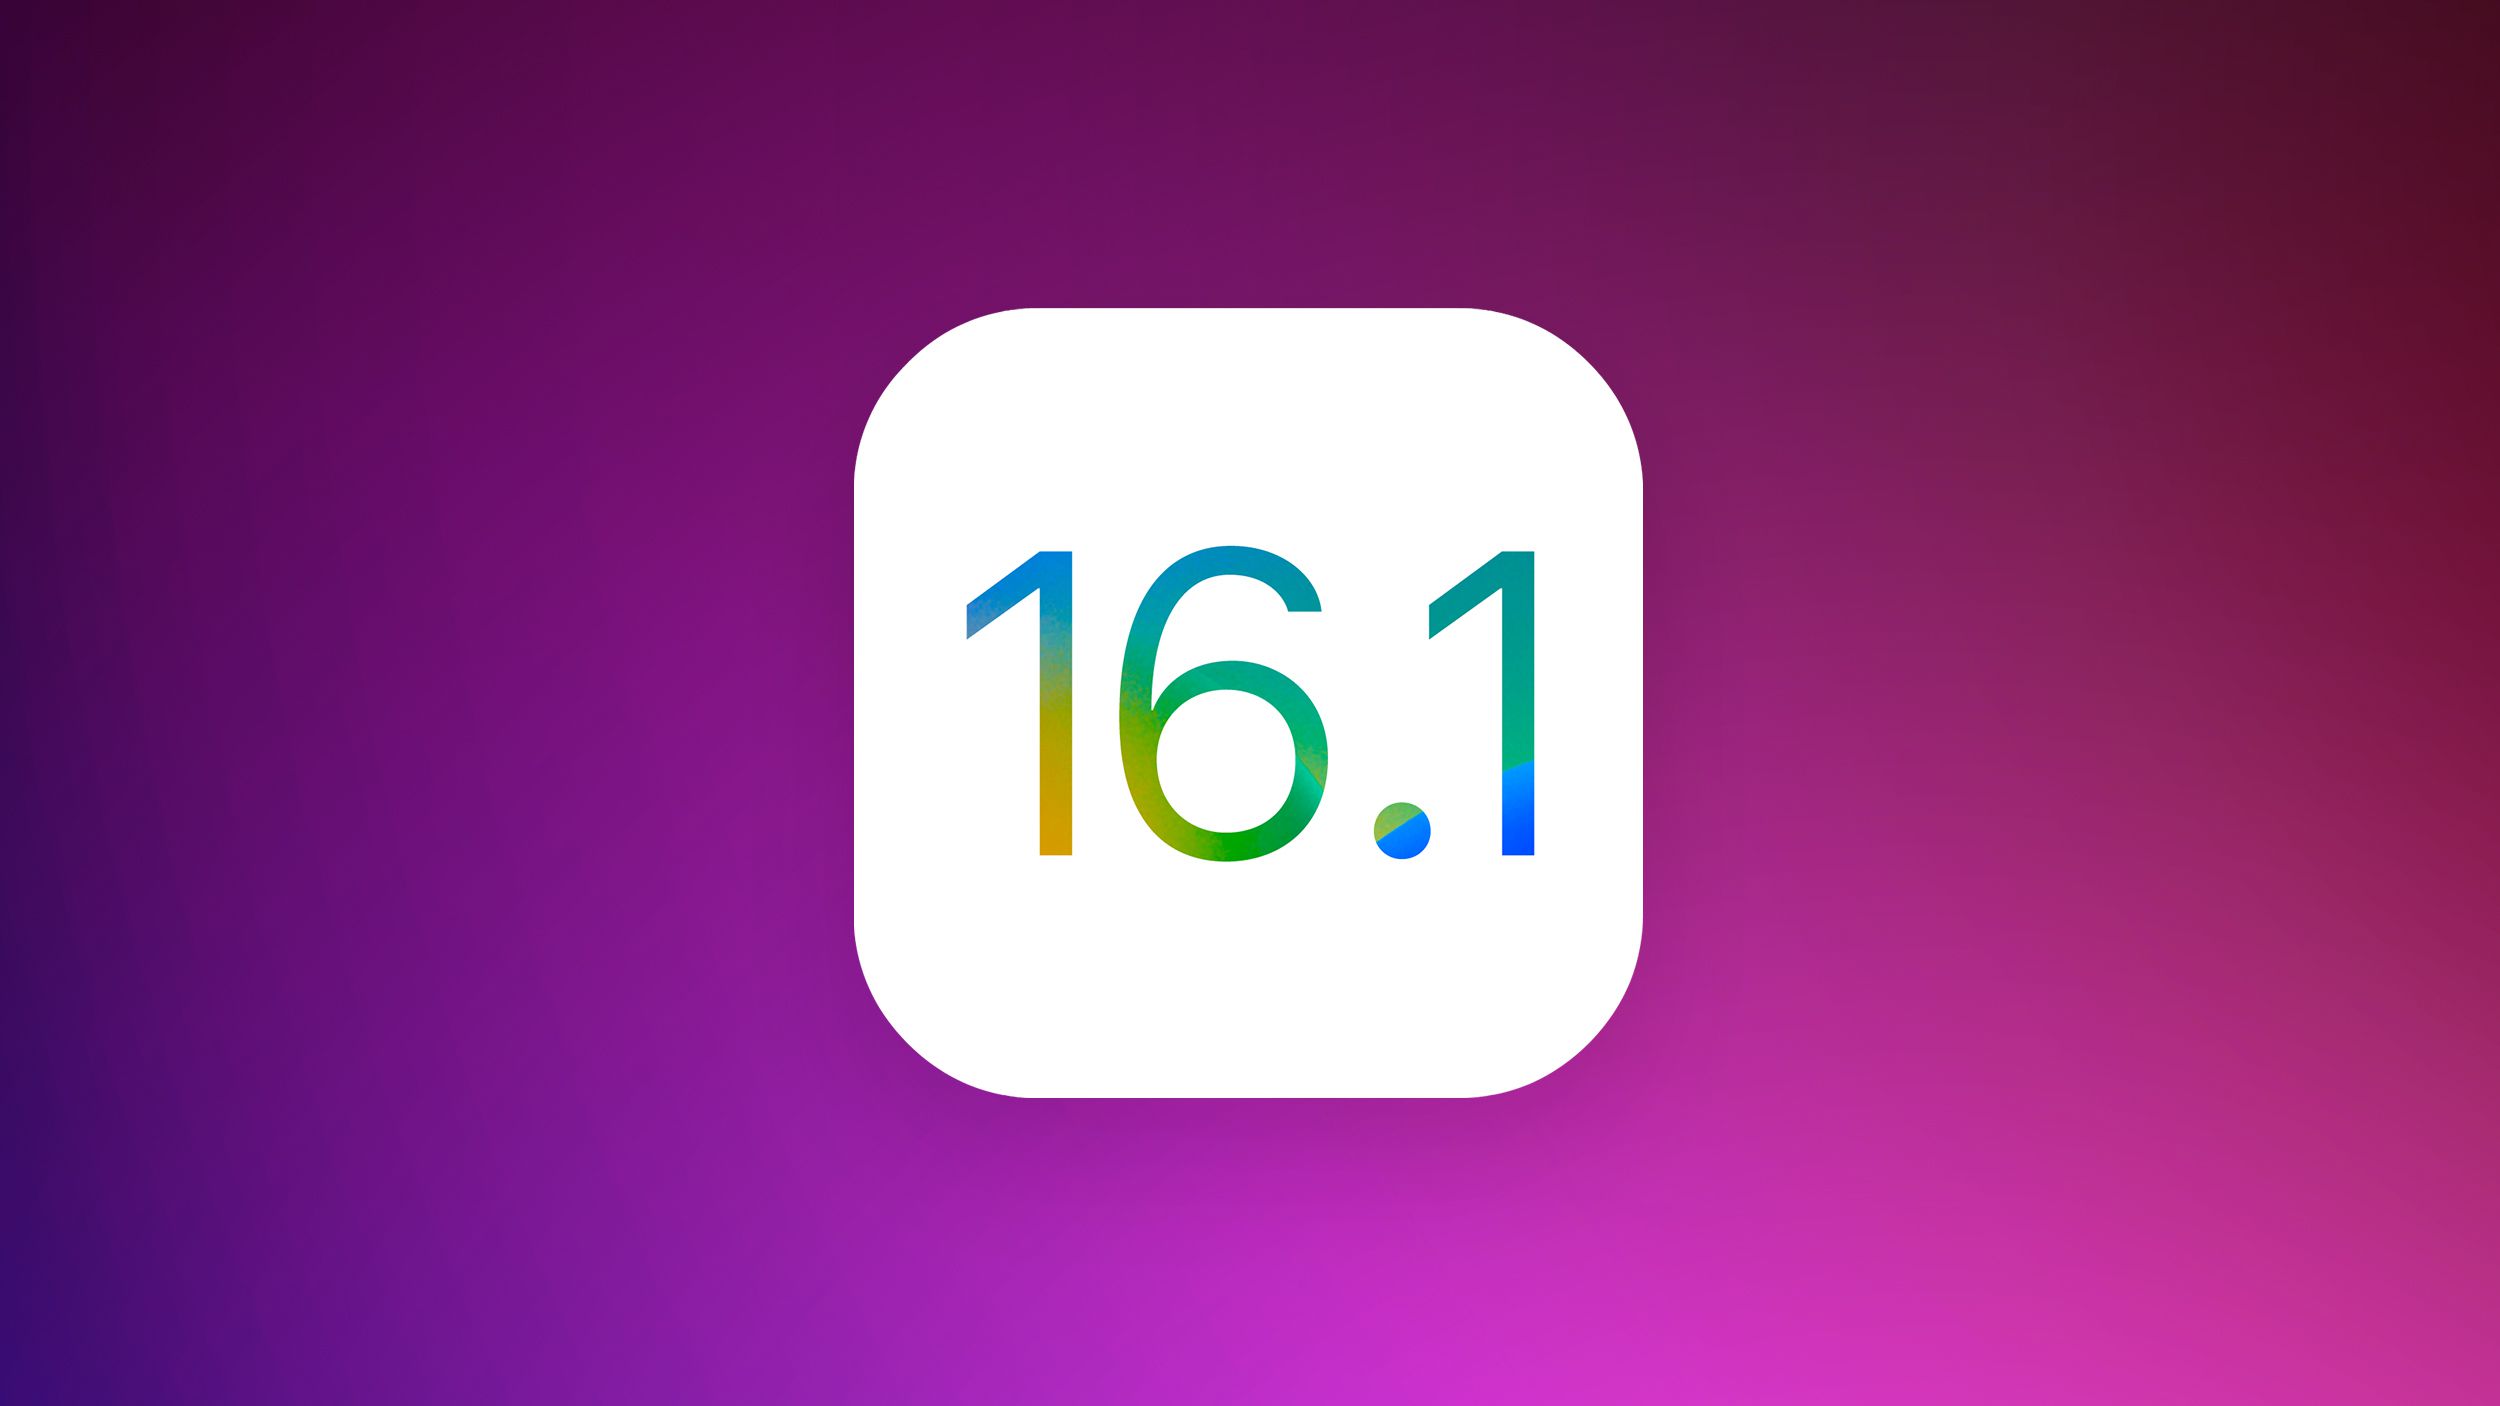 Everything New with iOS 16.1 Beta 2: Lock Screen Charging Indicator, Copy-Paste Warning Fix, Battery Status Updates, and More